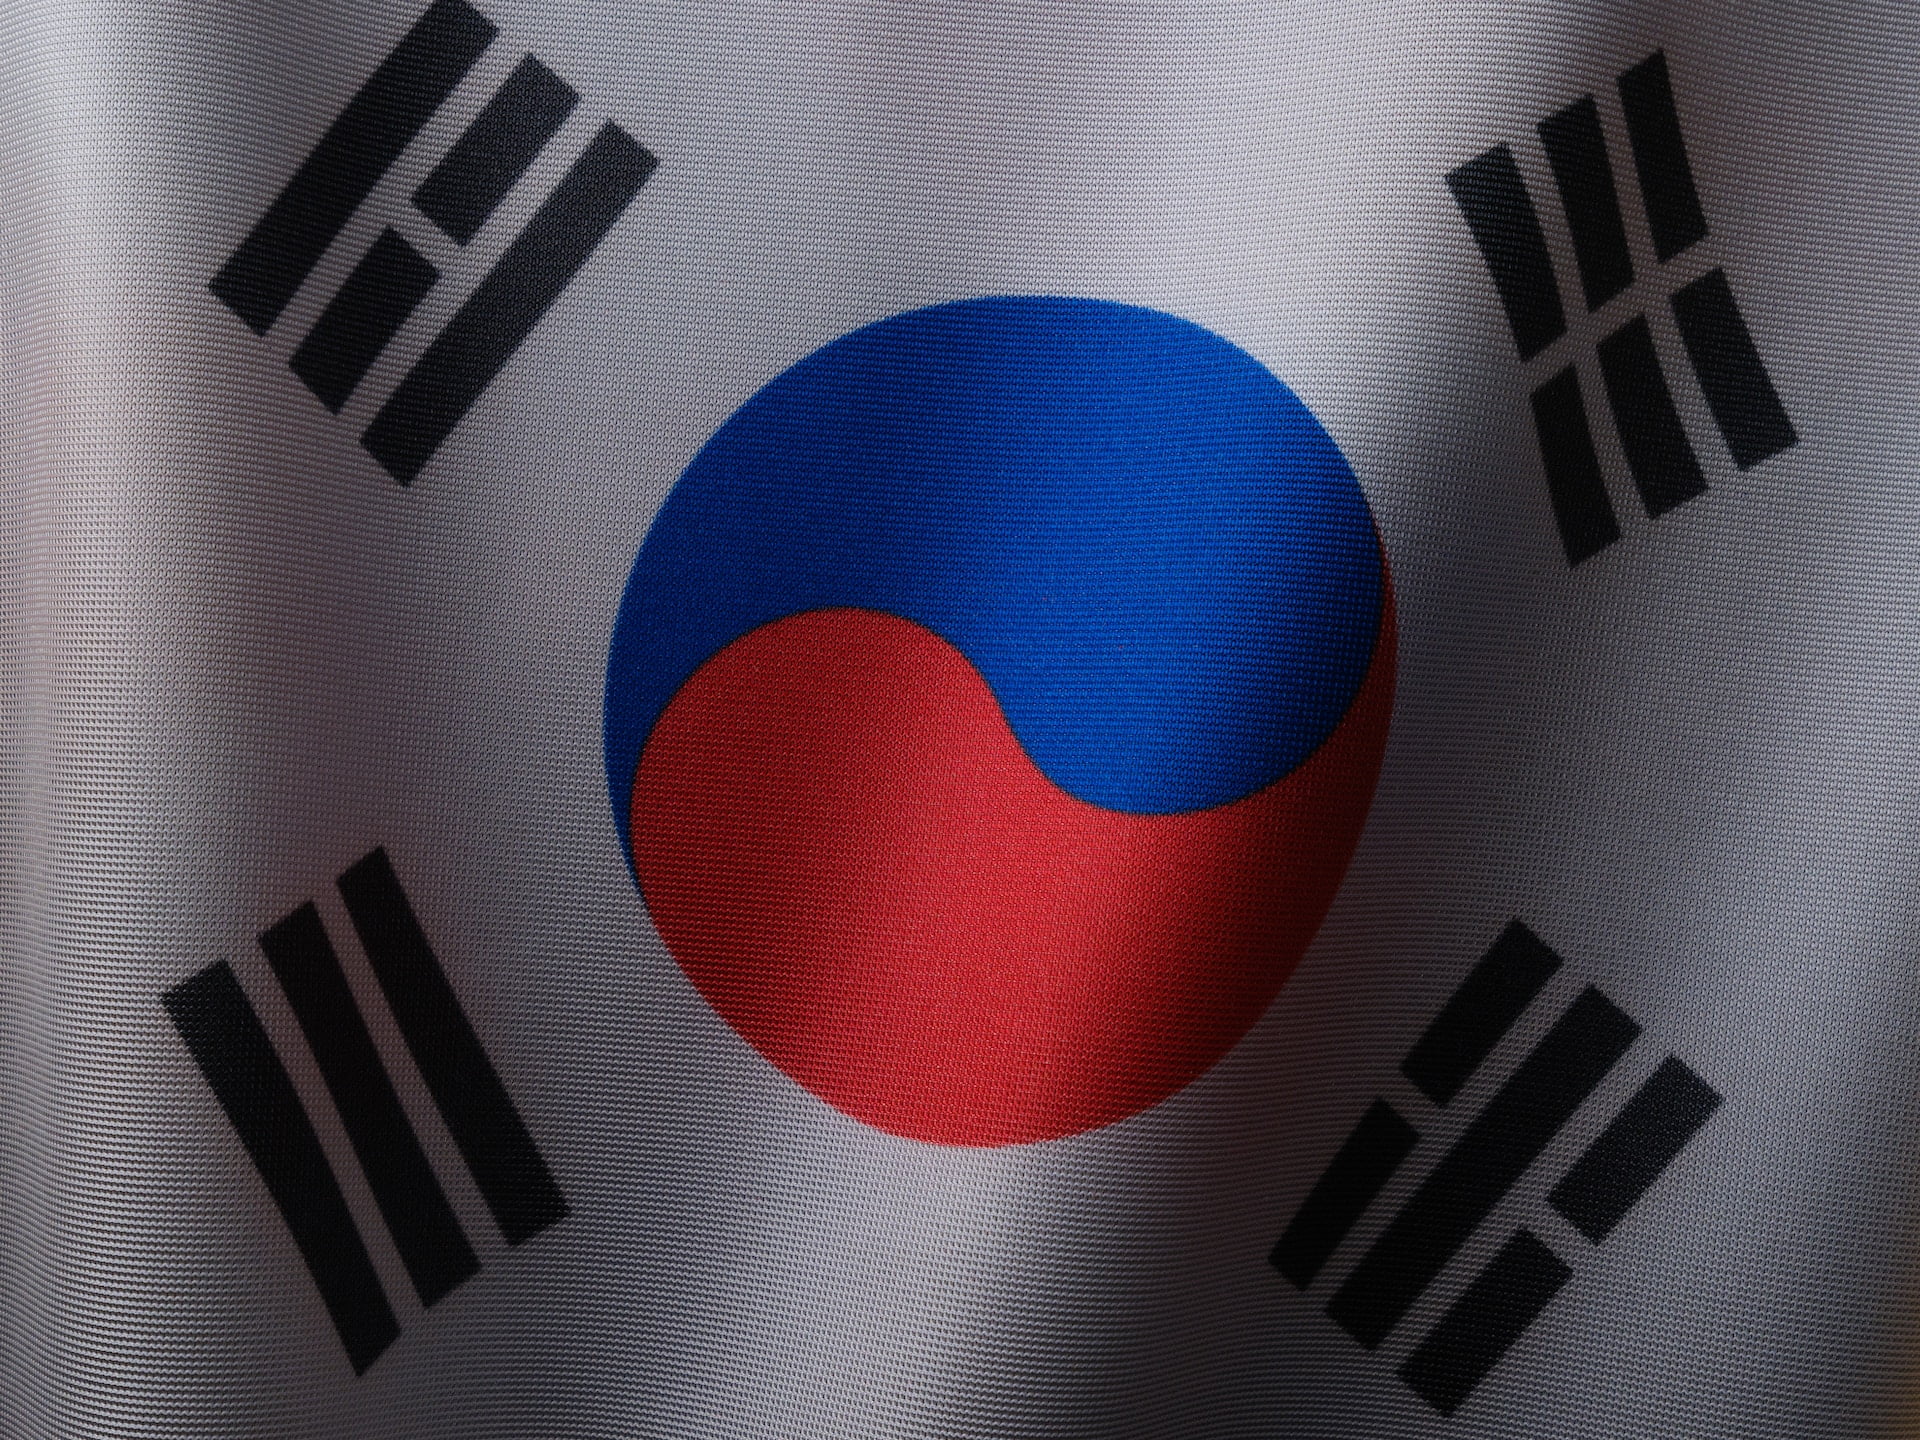 South Korea takes action against unfair cryptocurrency trading